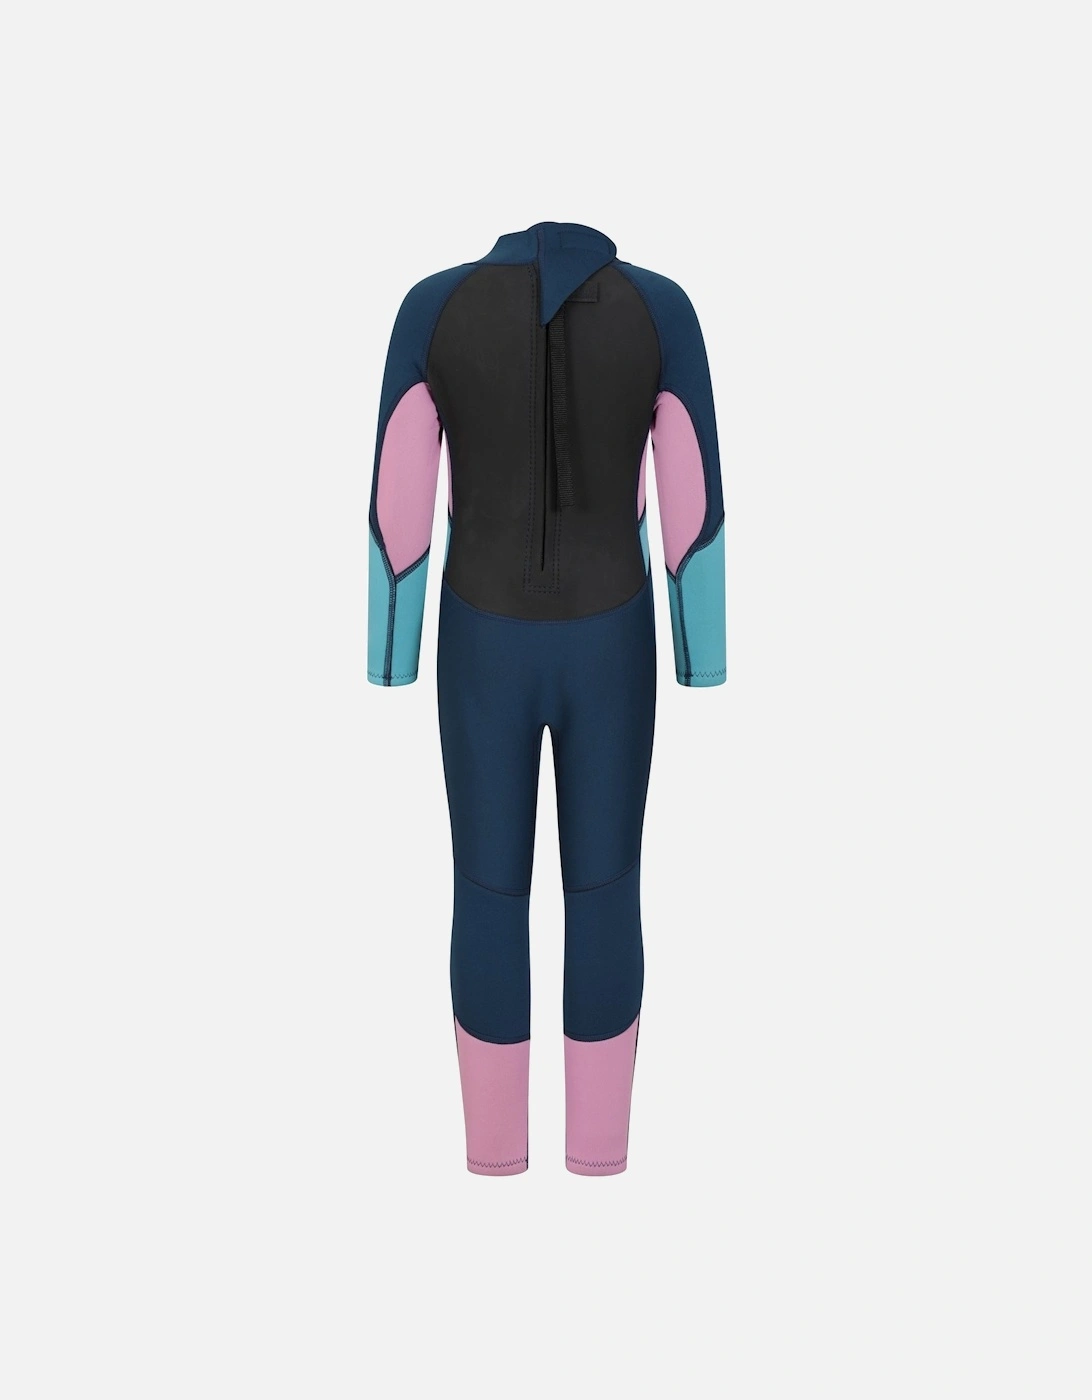 Childrens/Kids 3mm Thickness Wetsuit